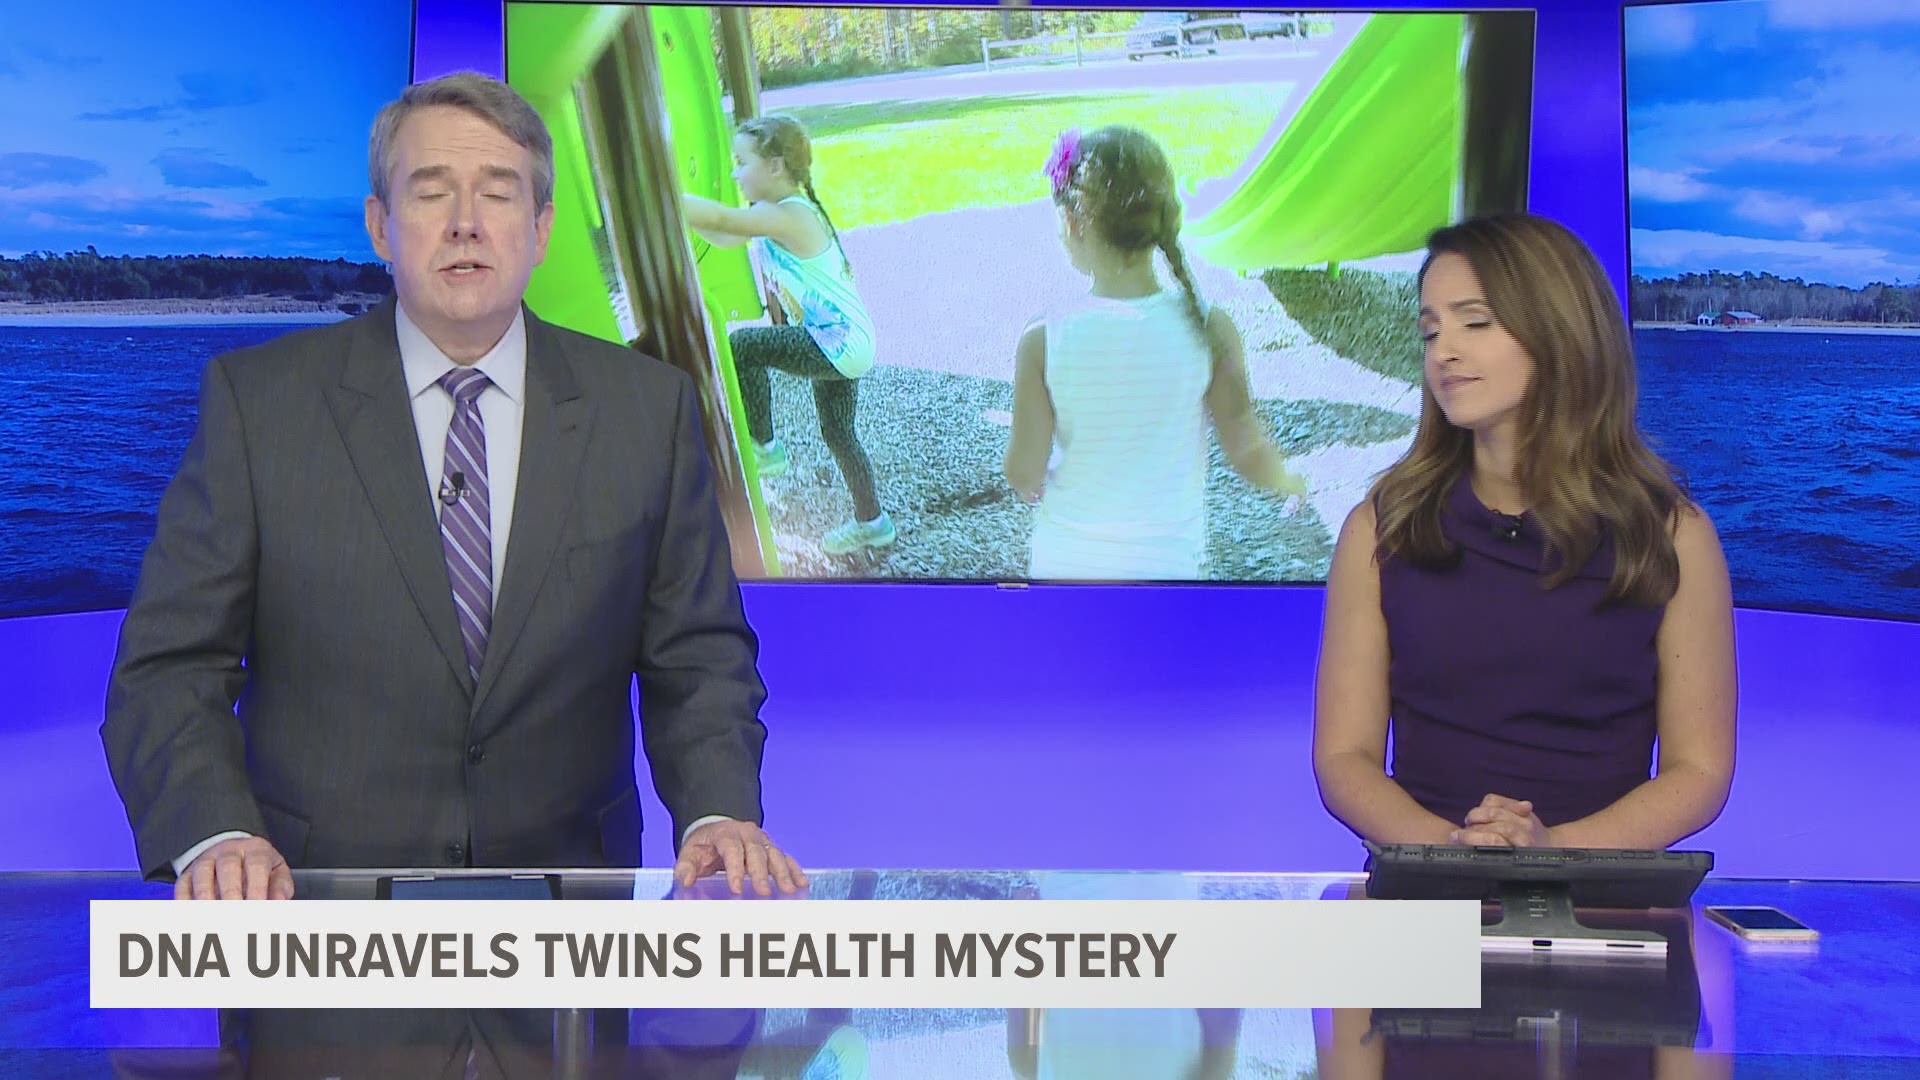 DNA sequencing helps to reveal undiagnosed illnesses in twin girls